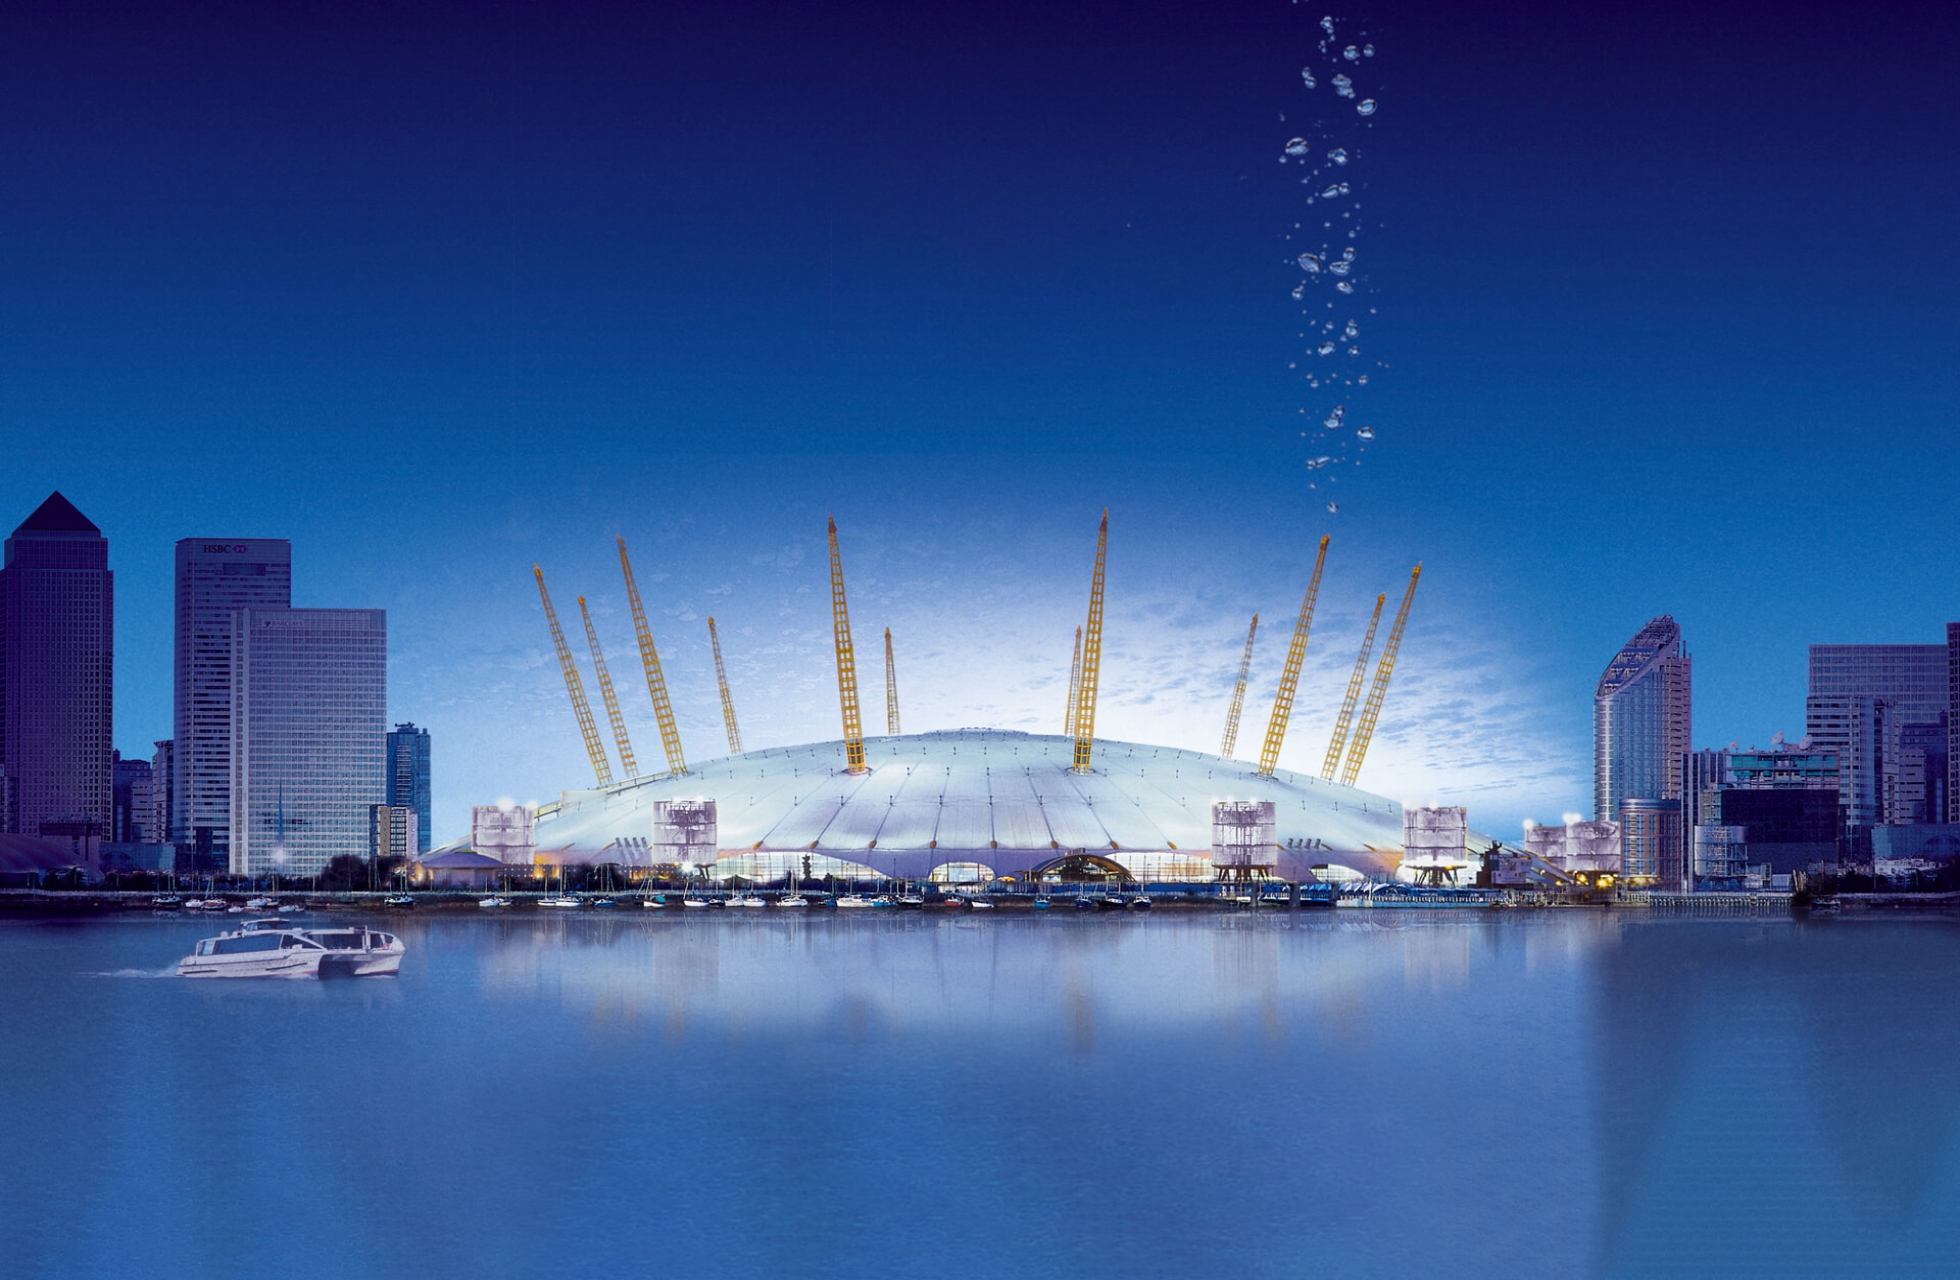 Events at The O2